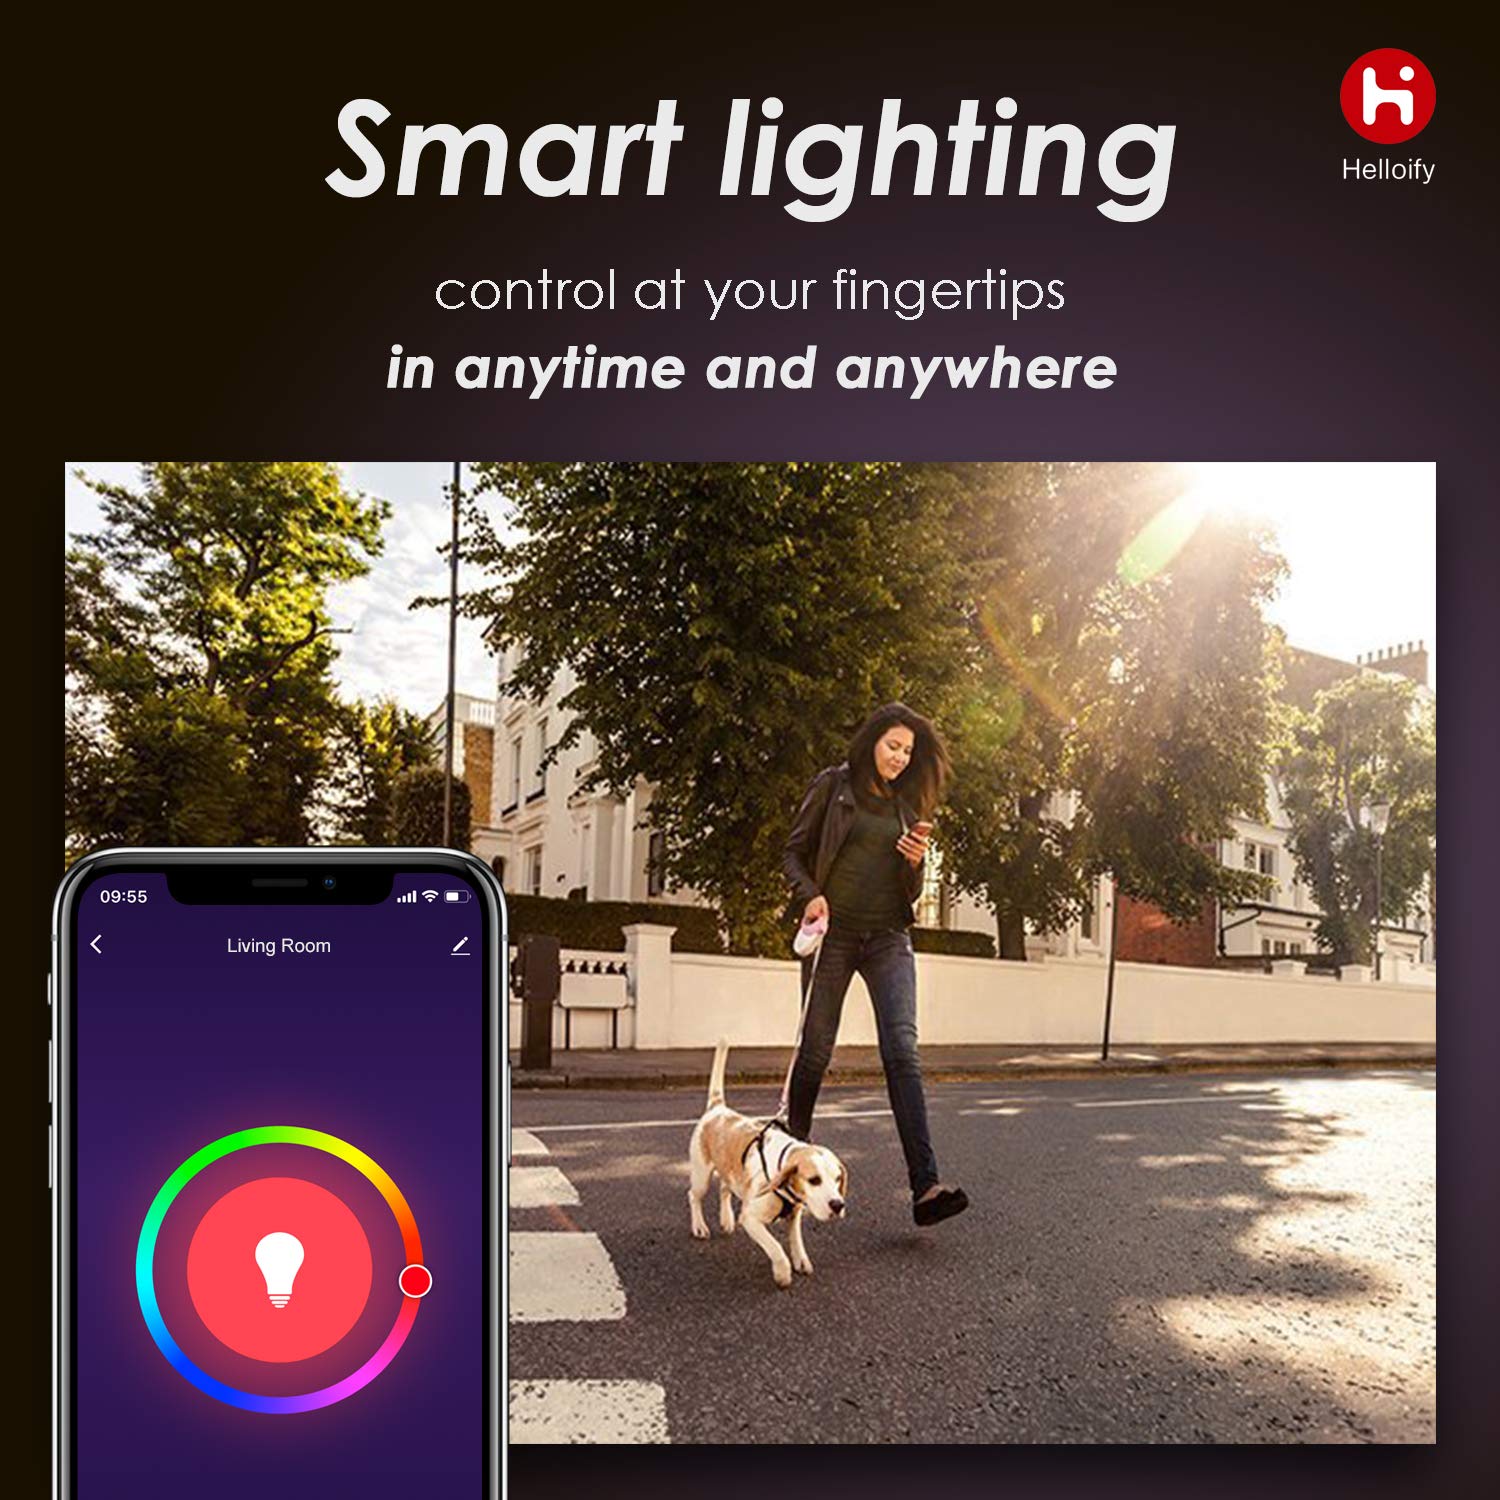 helloify GU10 LED Smart, WiFi Light Bulb Compatible with Alexa Google Home, RGBCW Color Changing, Cool Warm White Dimmable, No Hub Required, 40W Equivalent, RGB+2700K-6500K, 2 Pack